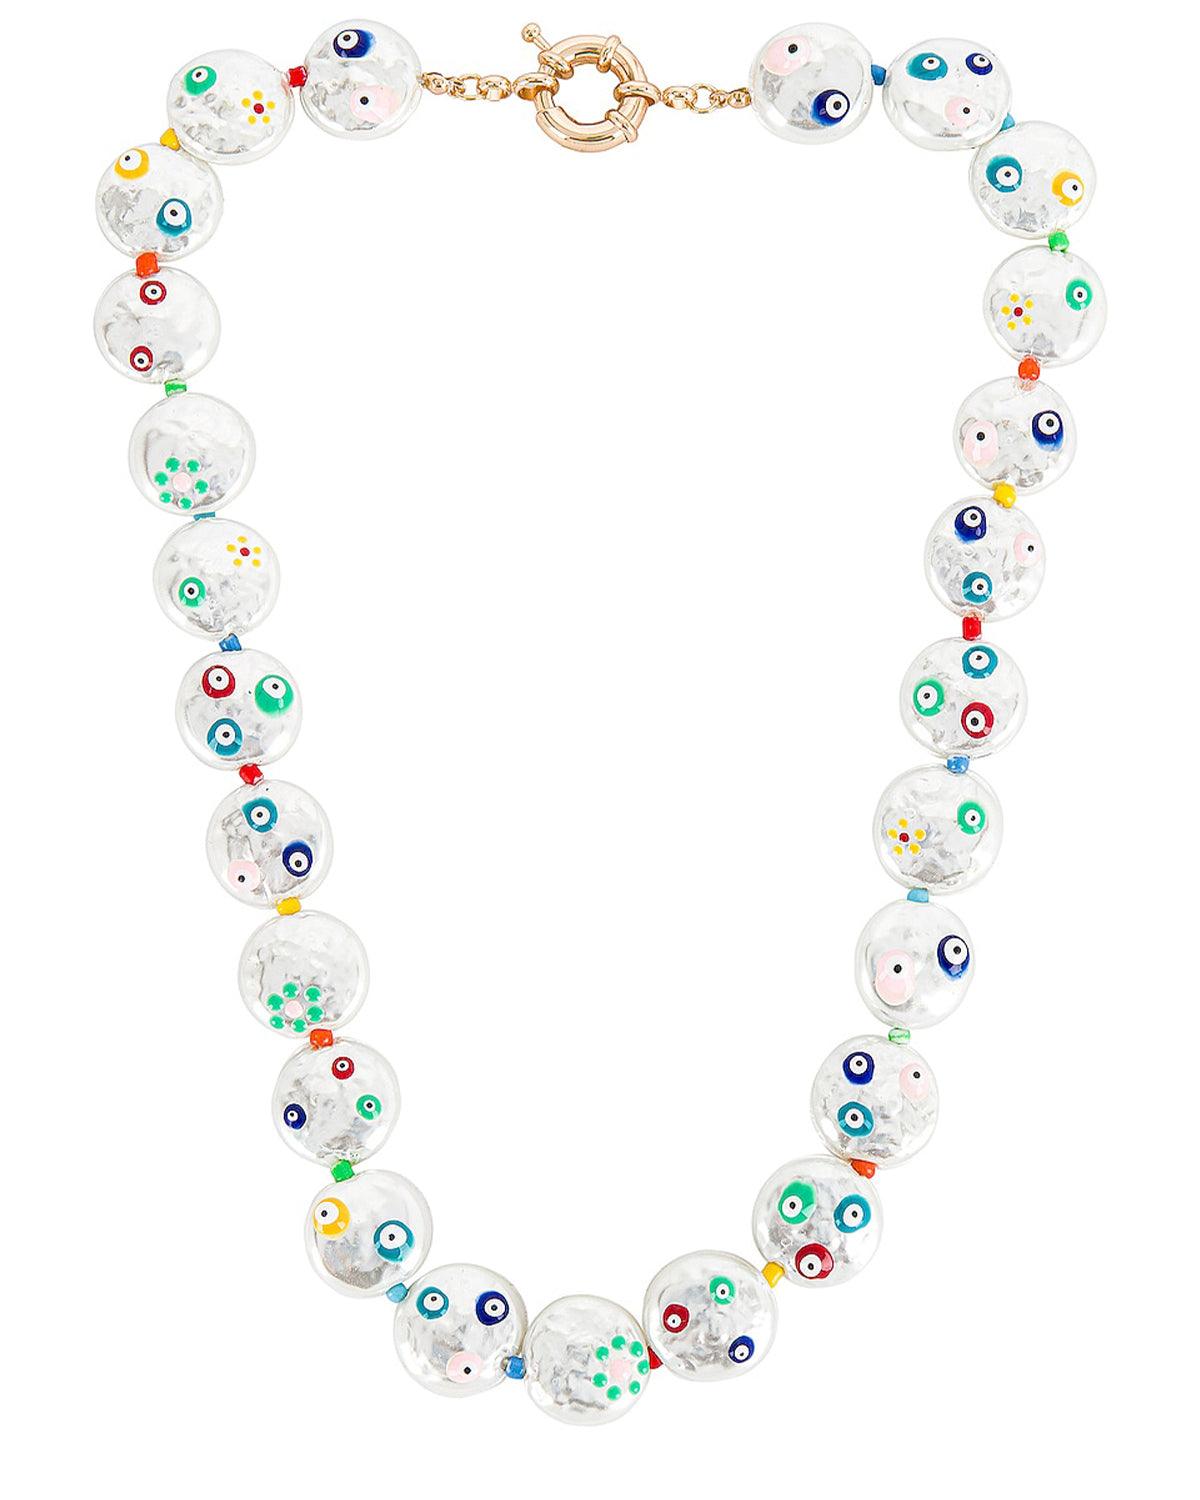 14k gold plated freshwater pearl necklace with a  spring clasp closure. Pearls have colorful dotted detailing. Necklace measures 18.5 inches long. 